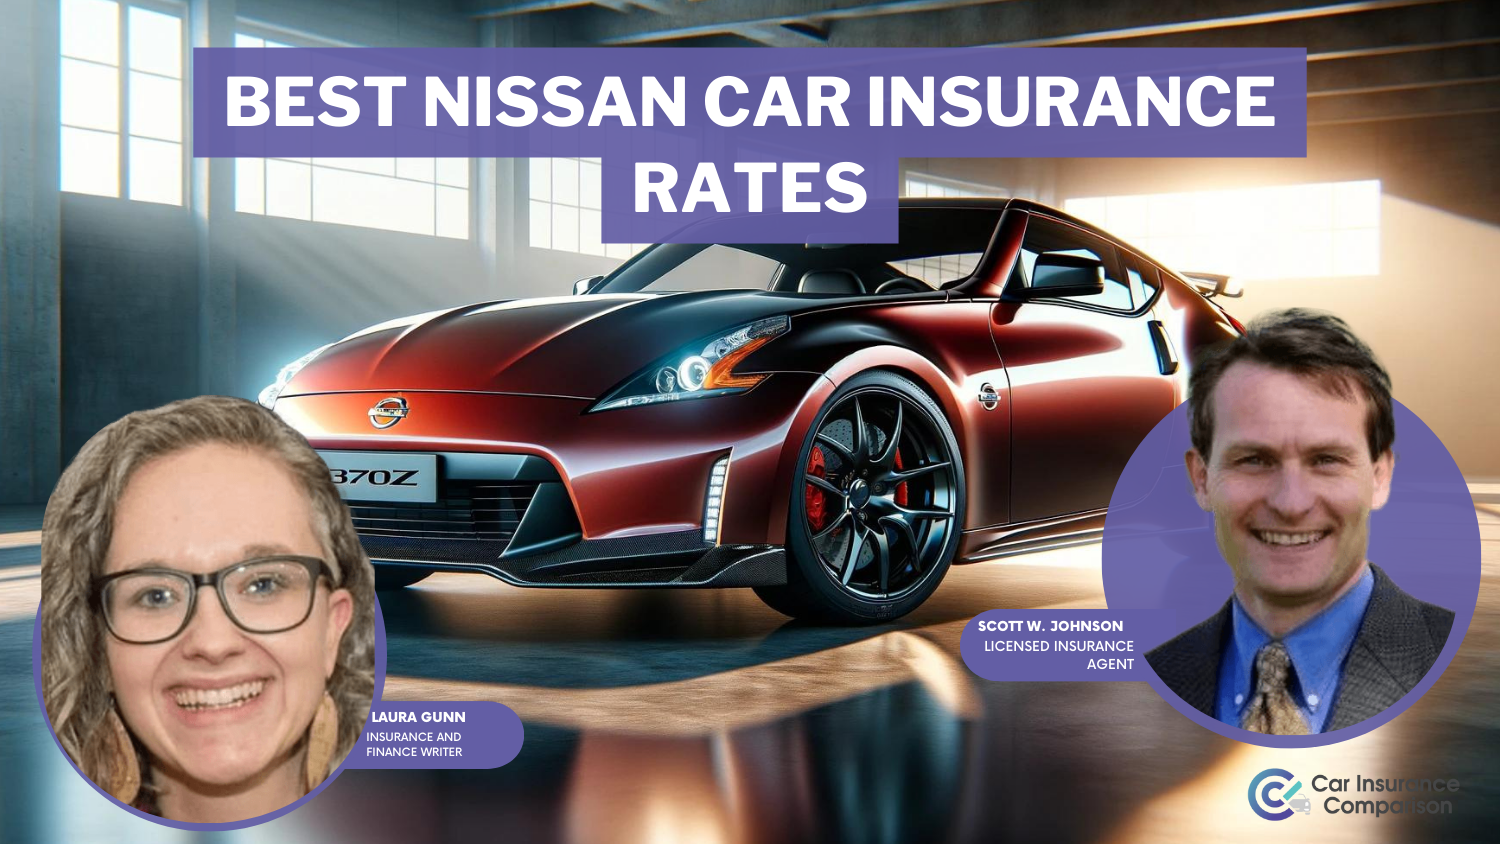 Best Nissan Car Insurance Rates: Progressive, Geico, and State Farm